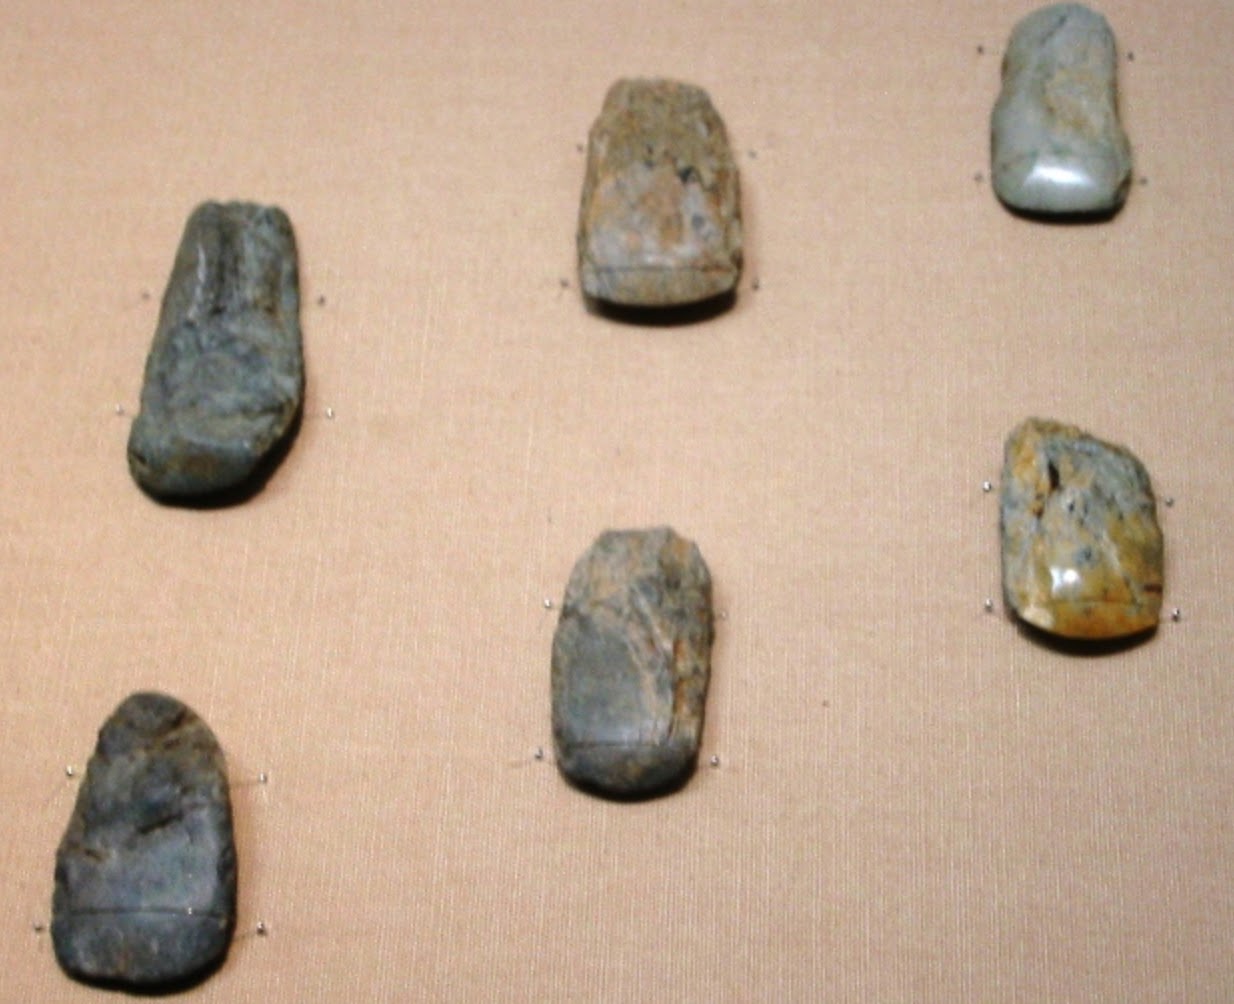 Japanese polished stone axes from the Japanese Paleolithic period